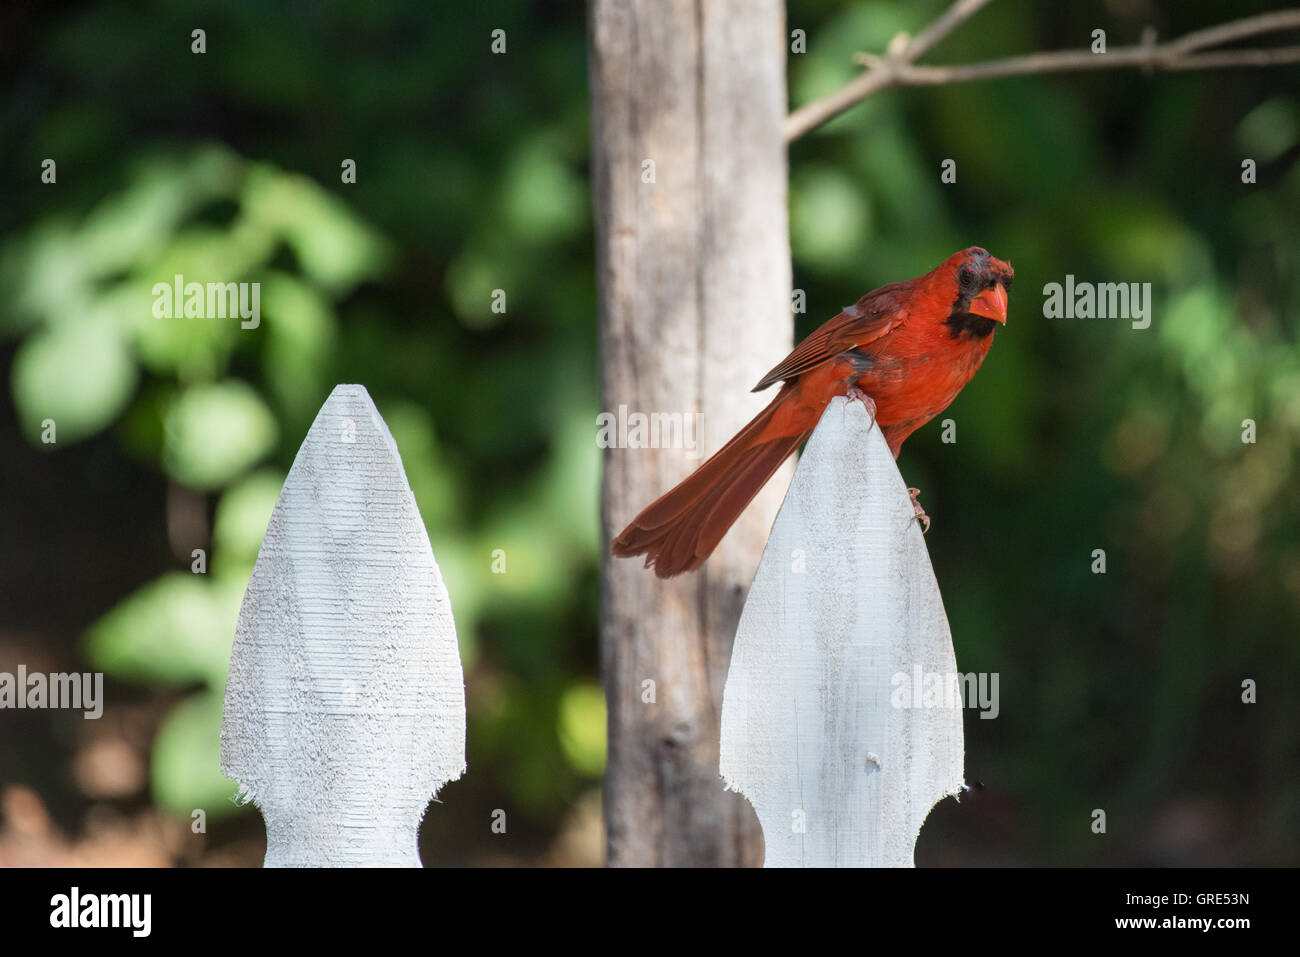 Northern Cardinal in moult sitting on a fence Stock Photo